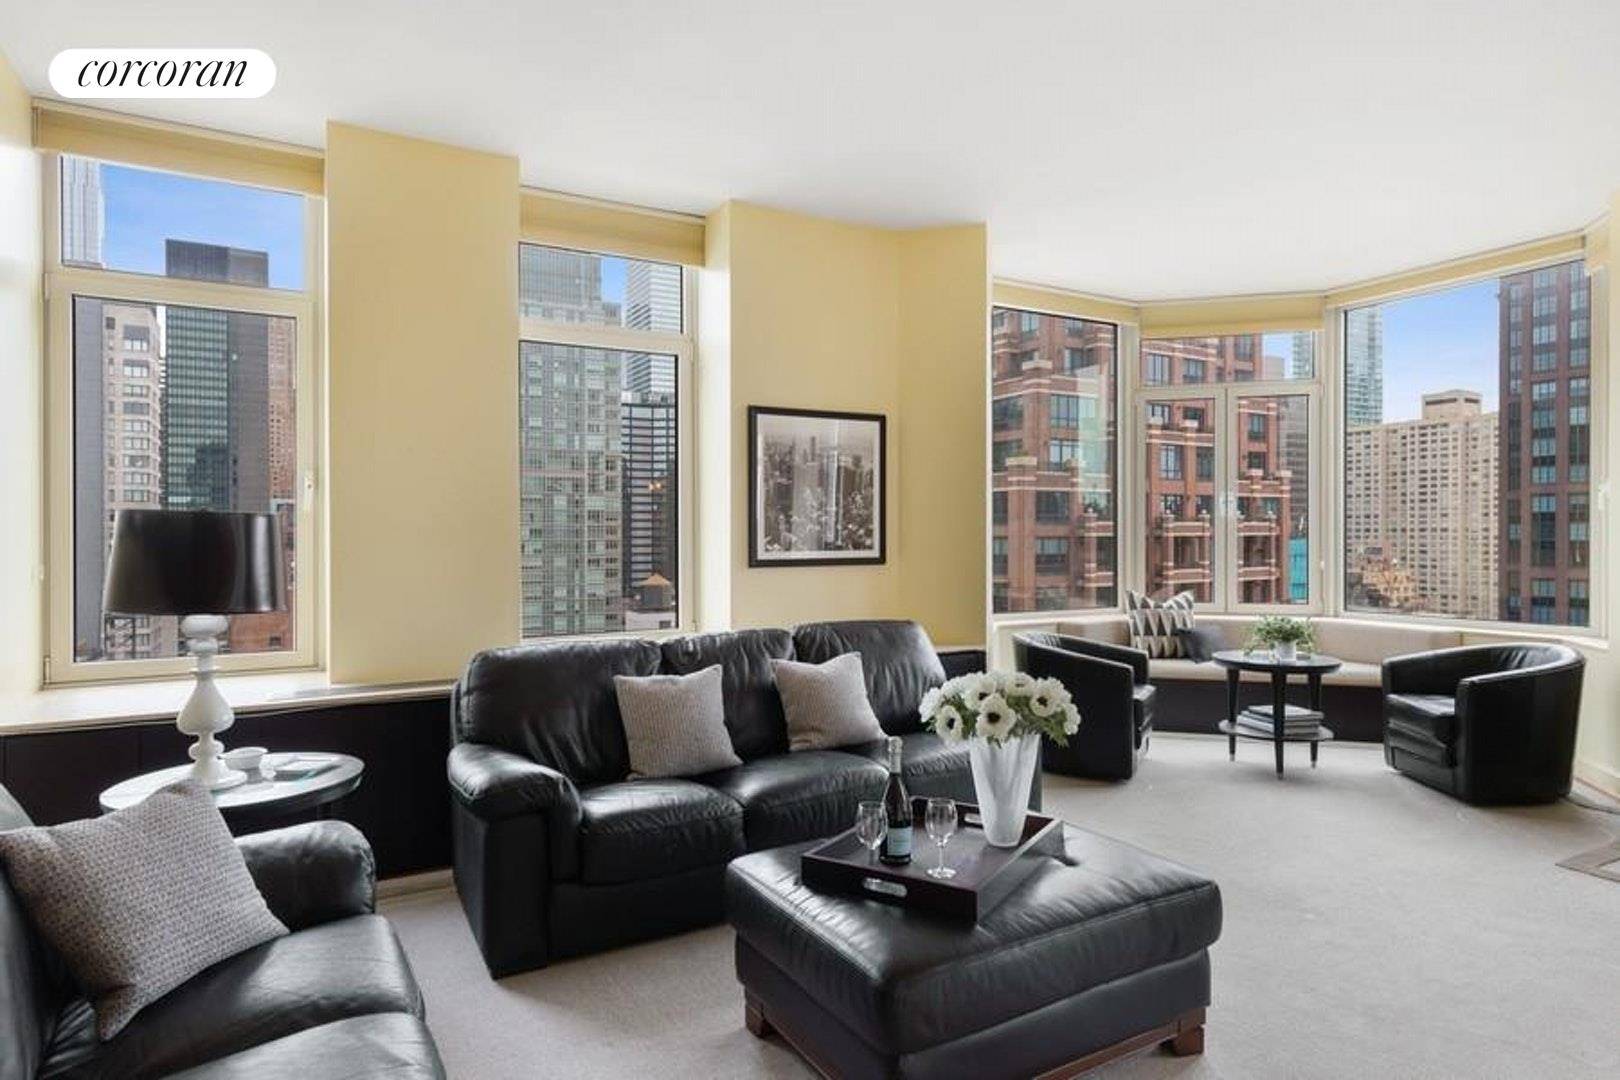 This uniquely appointed, super large, two bedroom, two bath condo spans 1812 SF and showcases wonderful Western views of the Manhattan skyline.